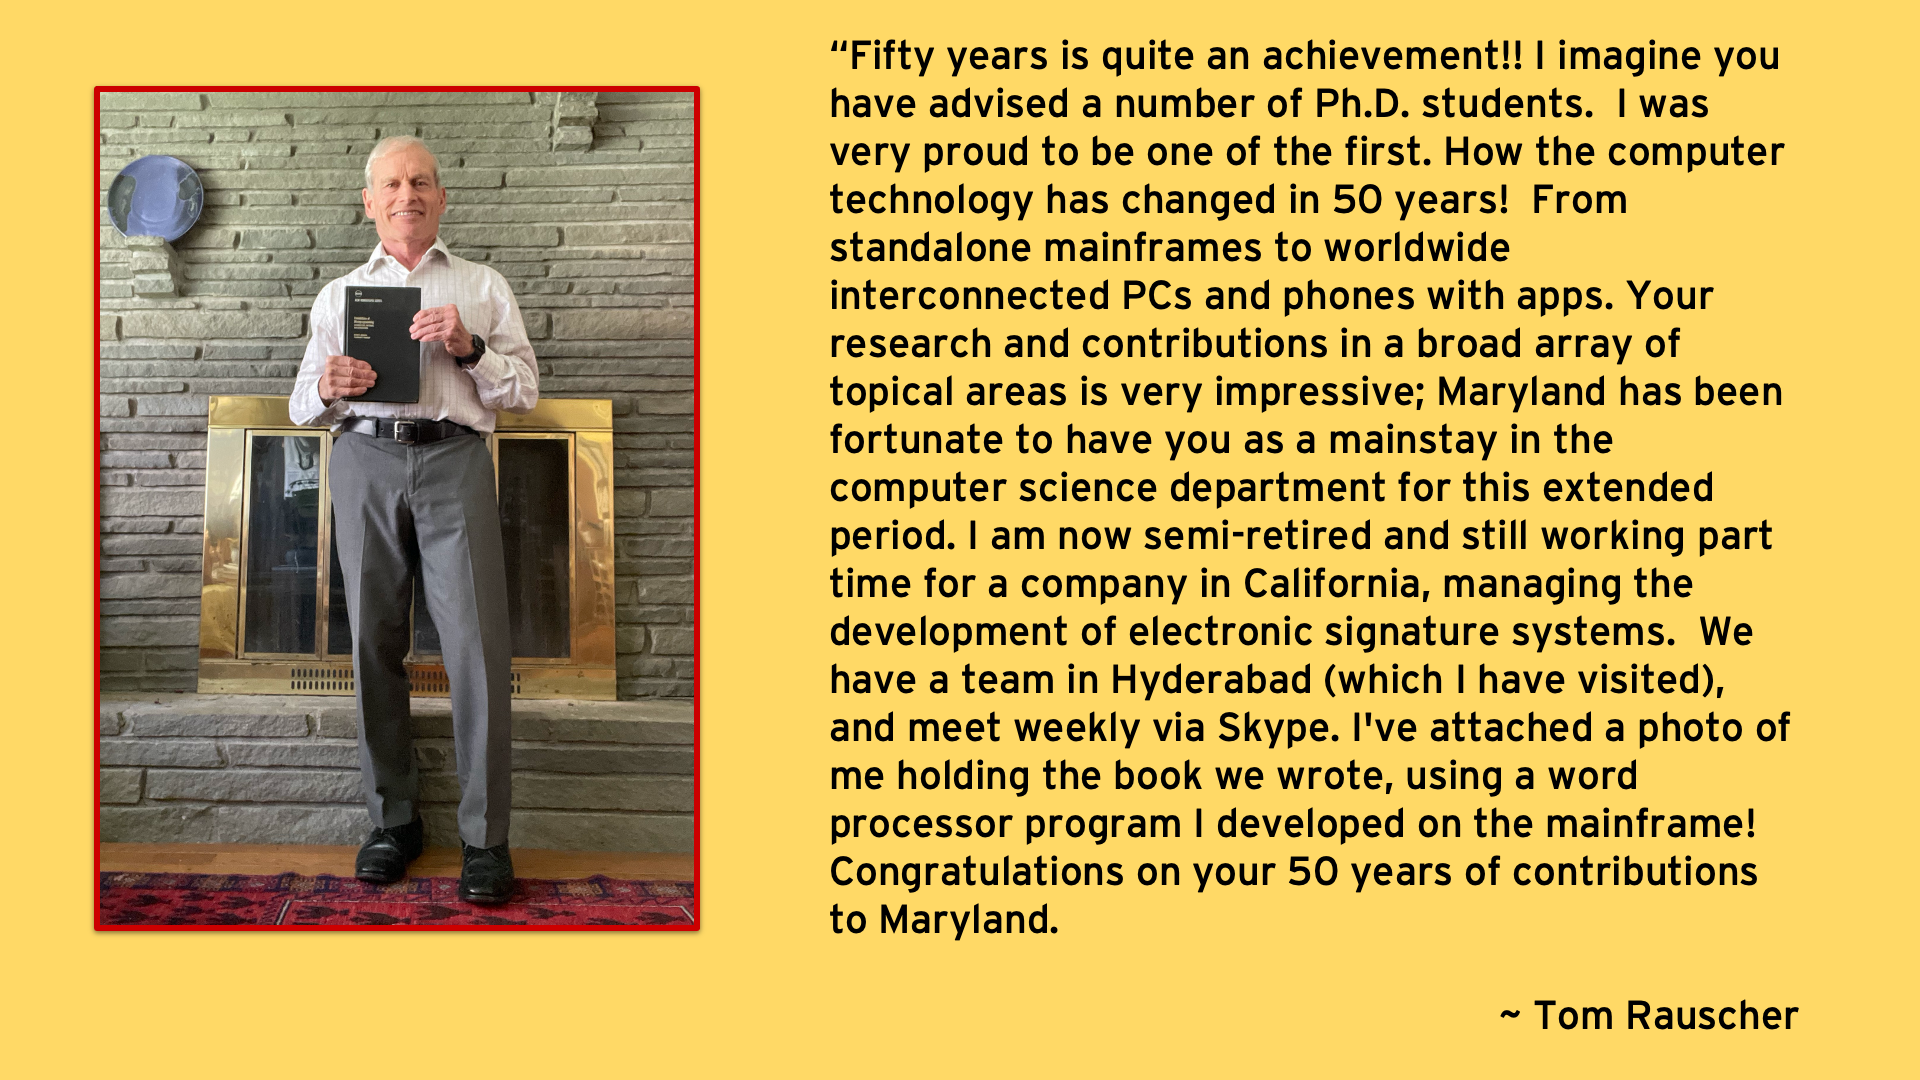 Fifty years is quite an achievement!! I imagine you have advised a number of Ph.D. students.  I was very proud to be one of the first. How the computer technology has changed in 50 years!  From standalone mainframes to worldwide interconnected PCs and phones with apps. Your research and contributions in a broad array of topical areas is very impressive - Tom Rauscher